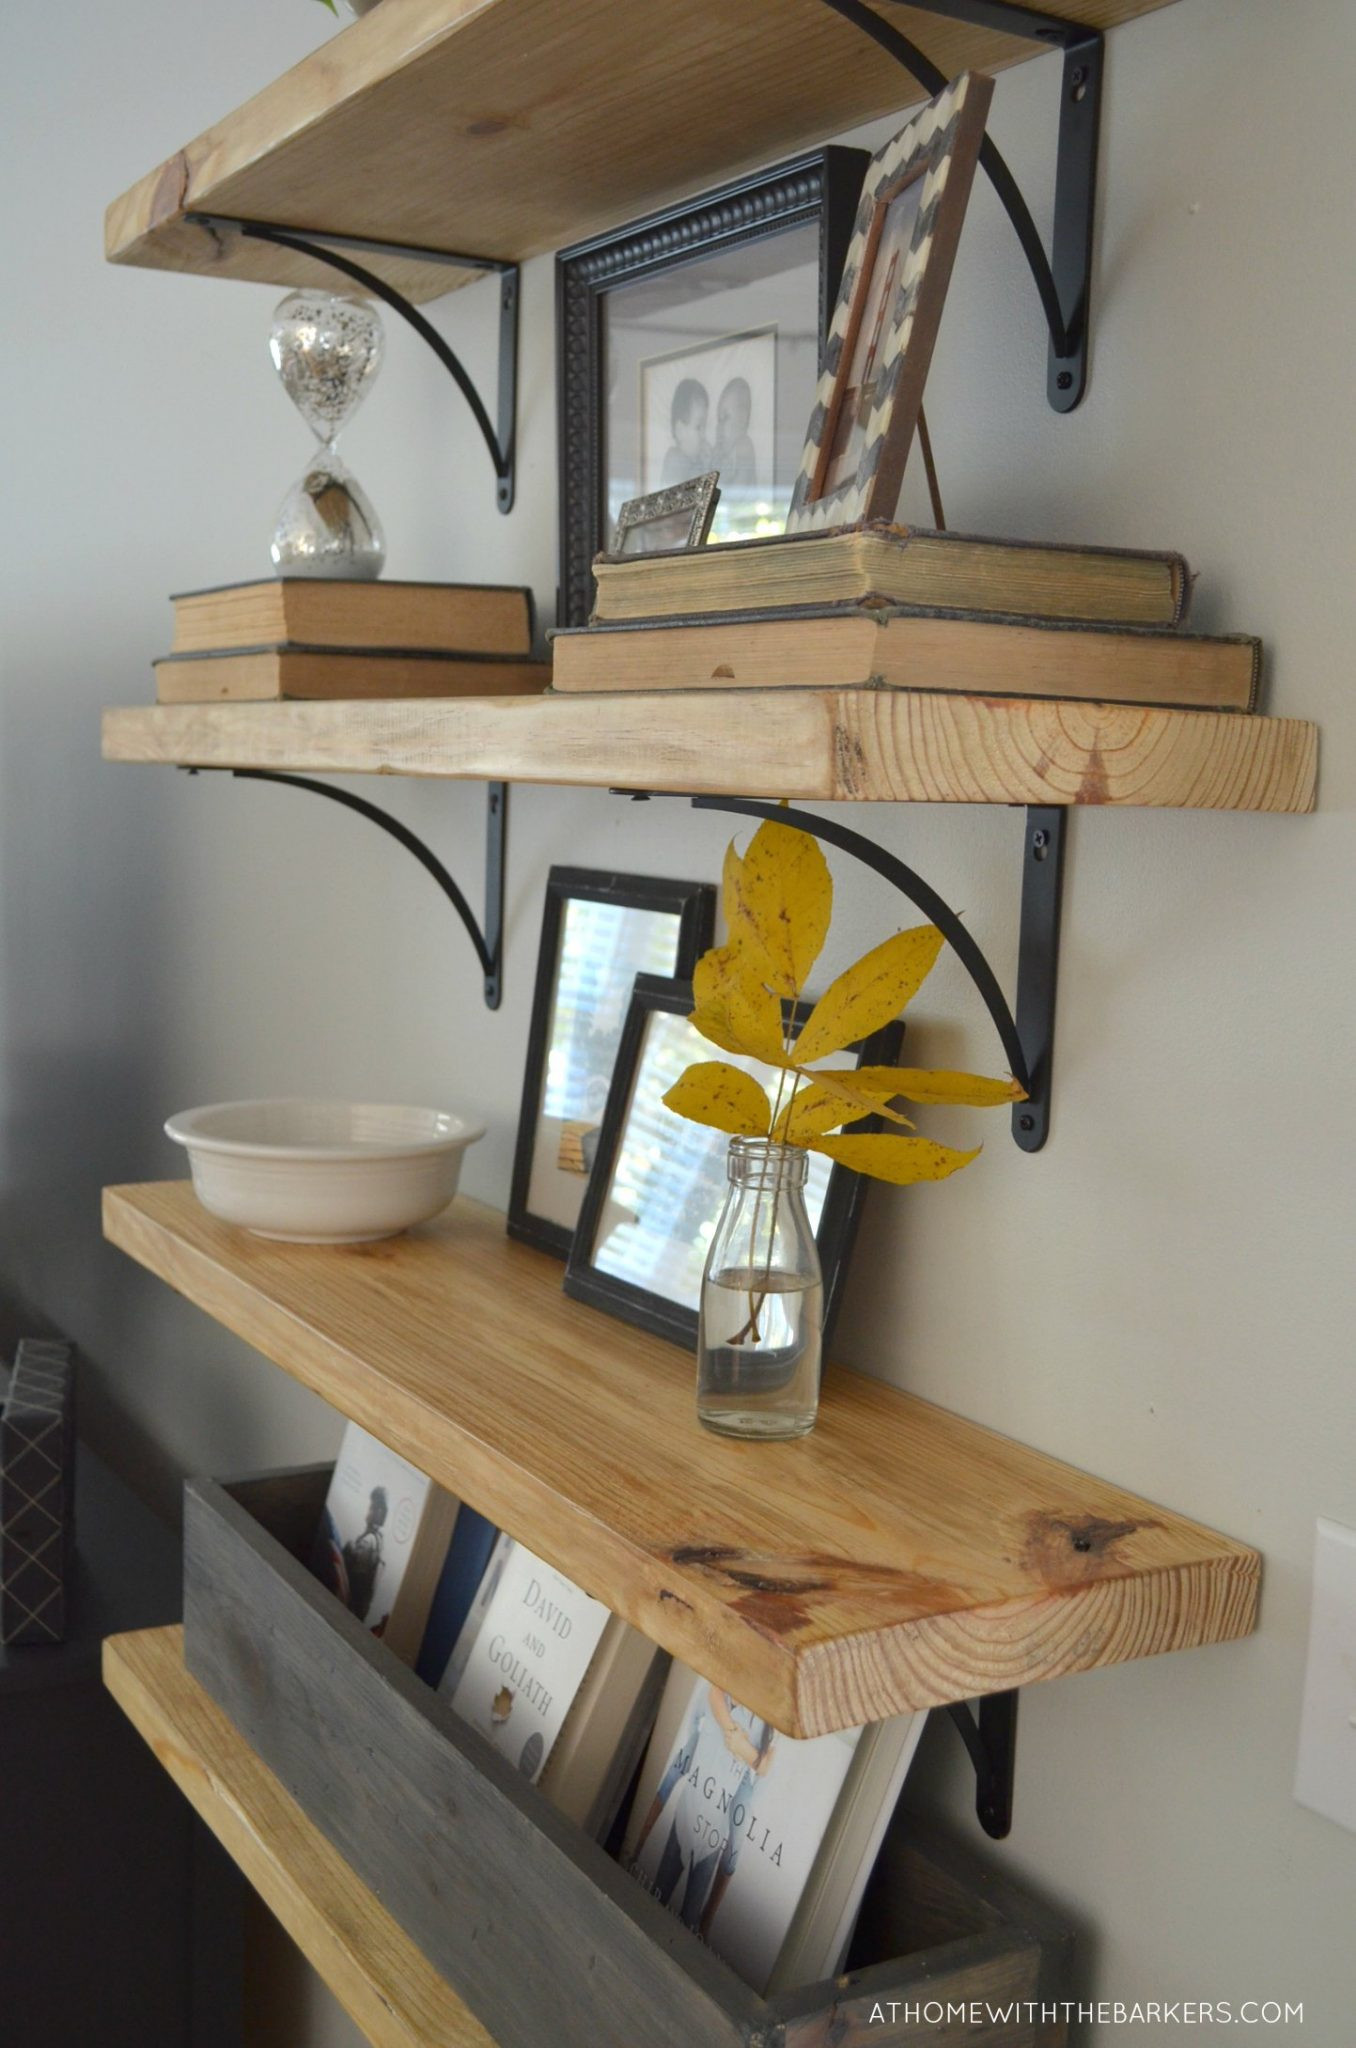 DIY Wood Shelf
 DIY Rustic Wood Shelves At Home with The Barkers